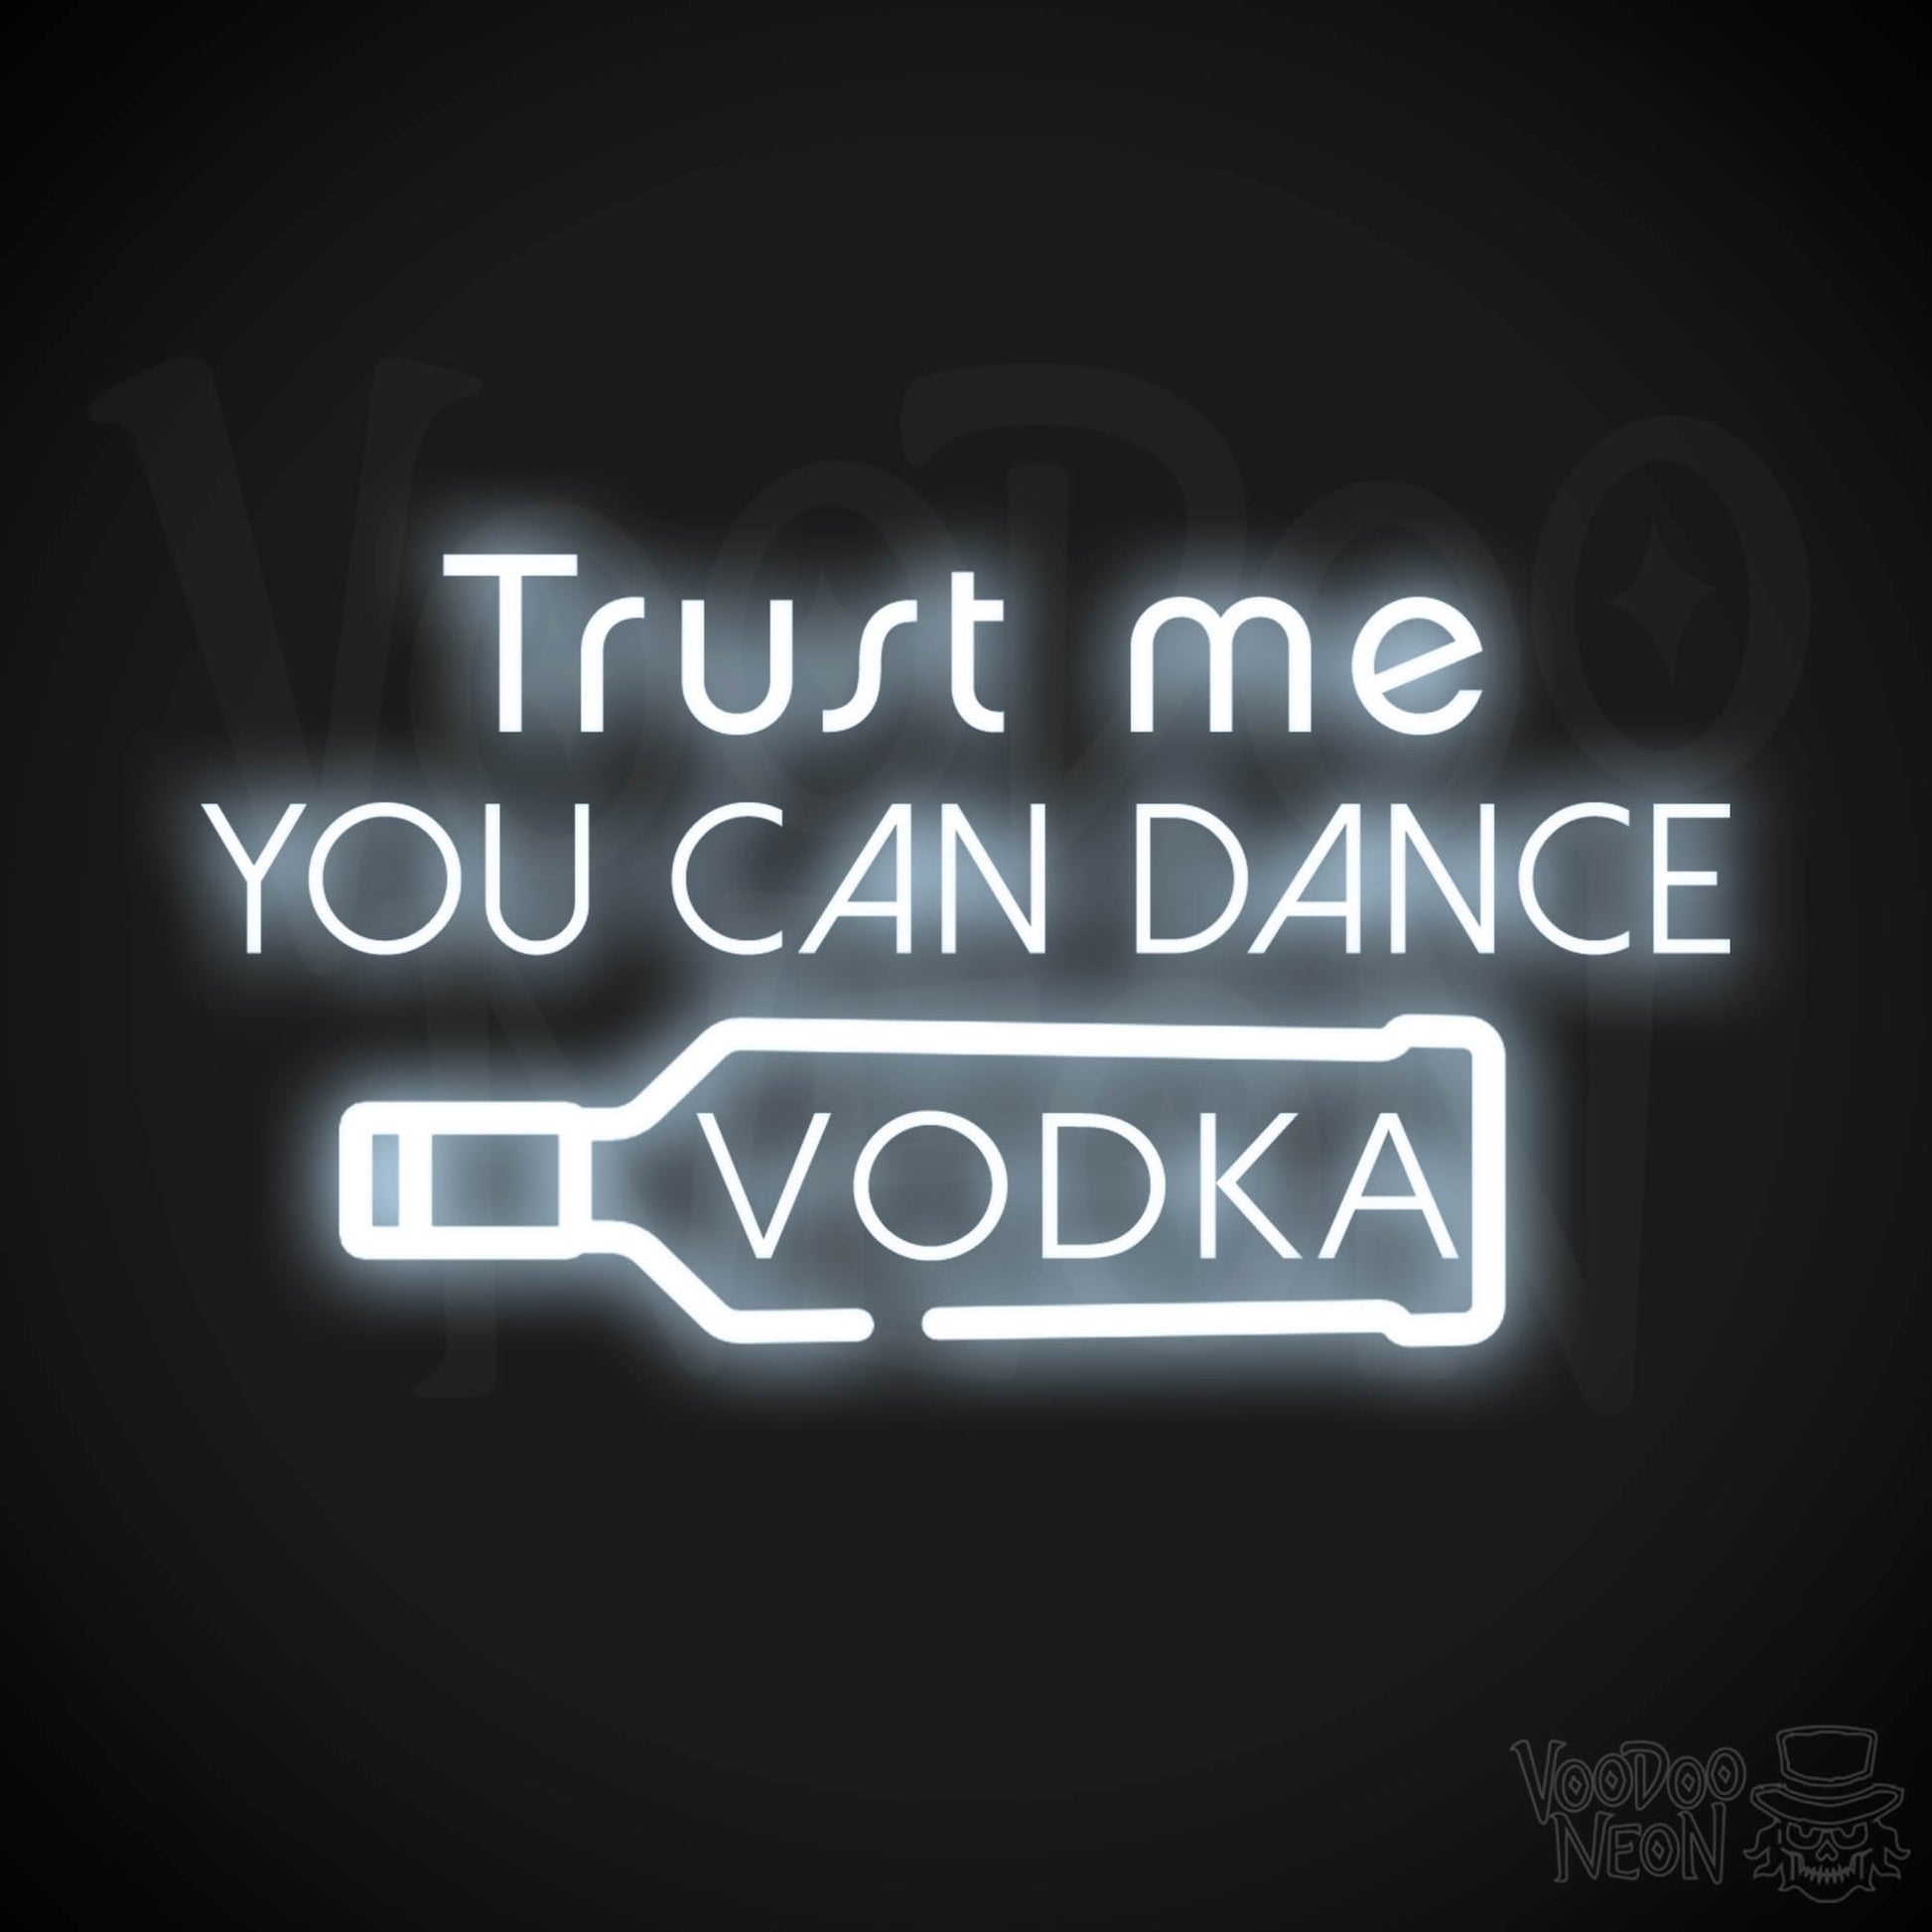 Trust Me You Can Dance Vodka Neon Sign - Vodka Bar Sign - LED Signs - Color Cool White